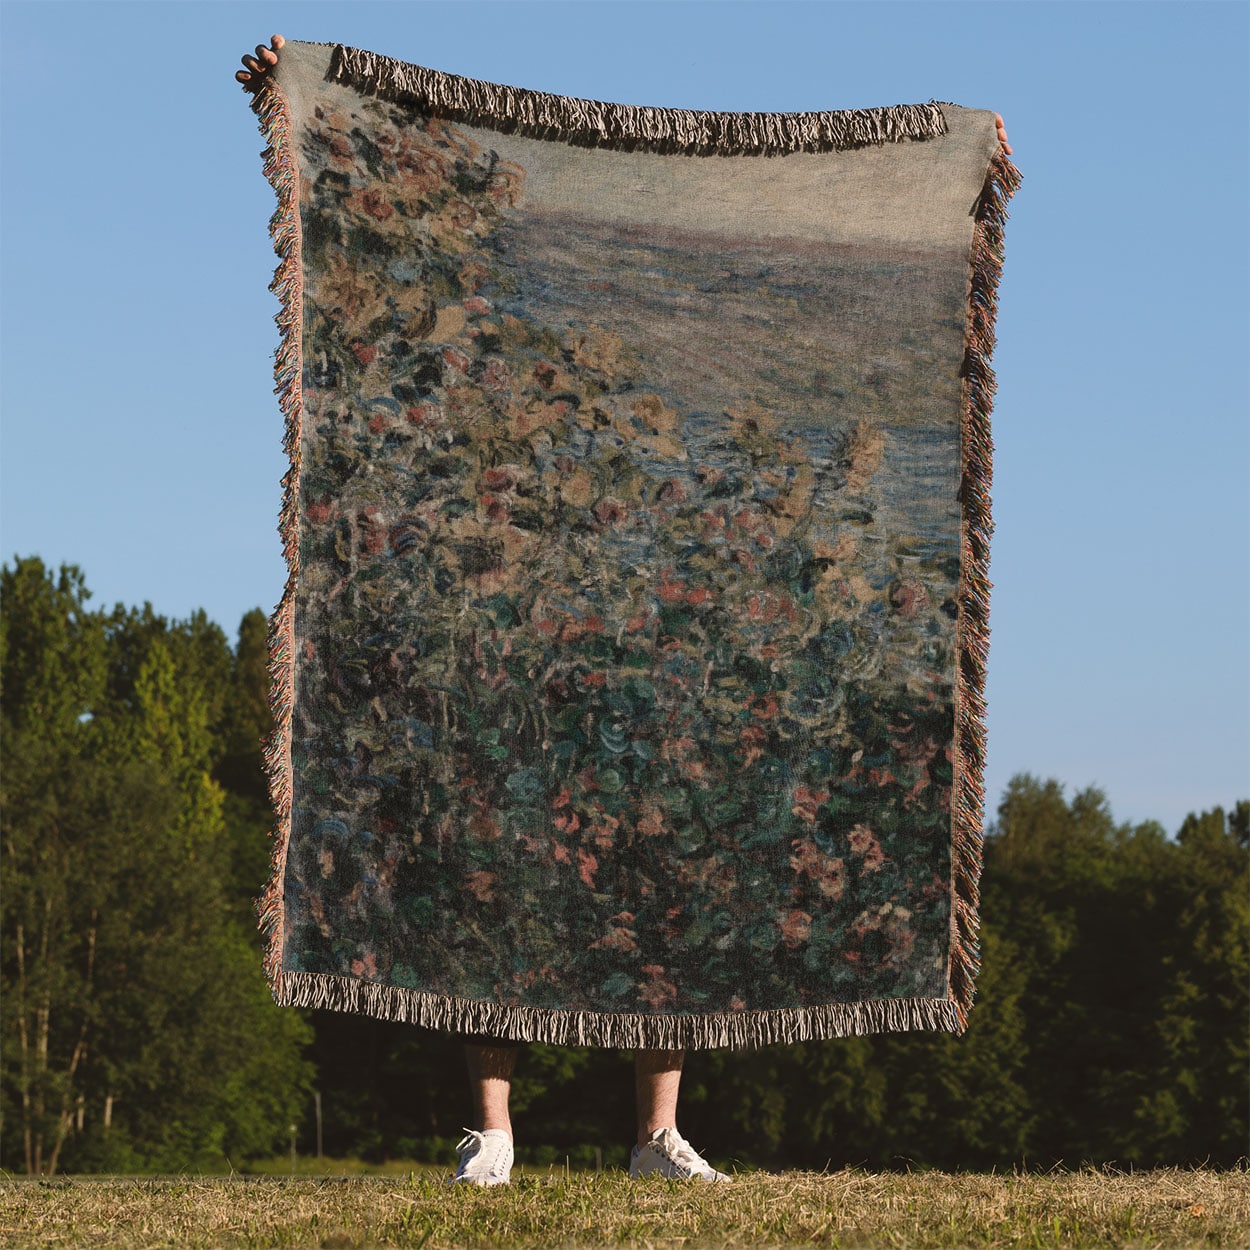 Muted Floral Woven Blanket Held on a Woman's Back Outside